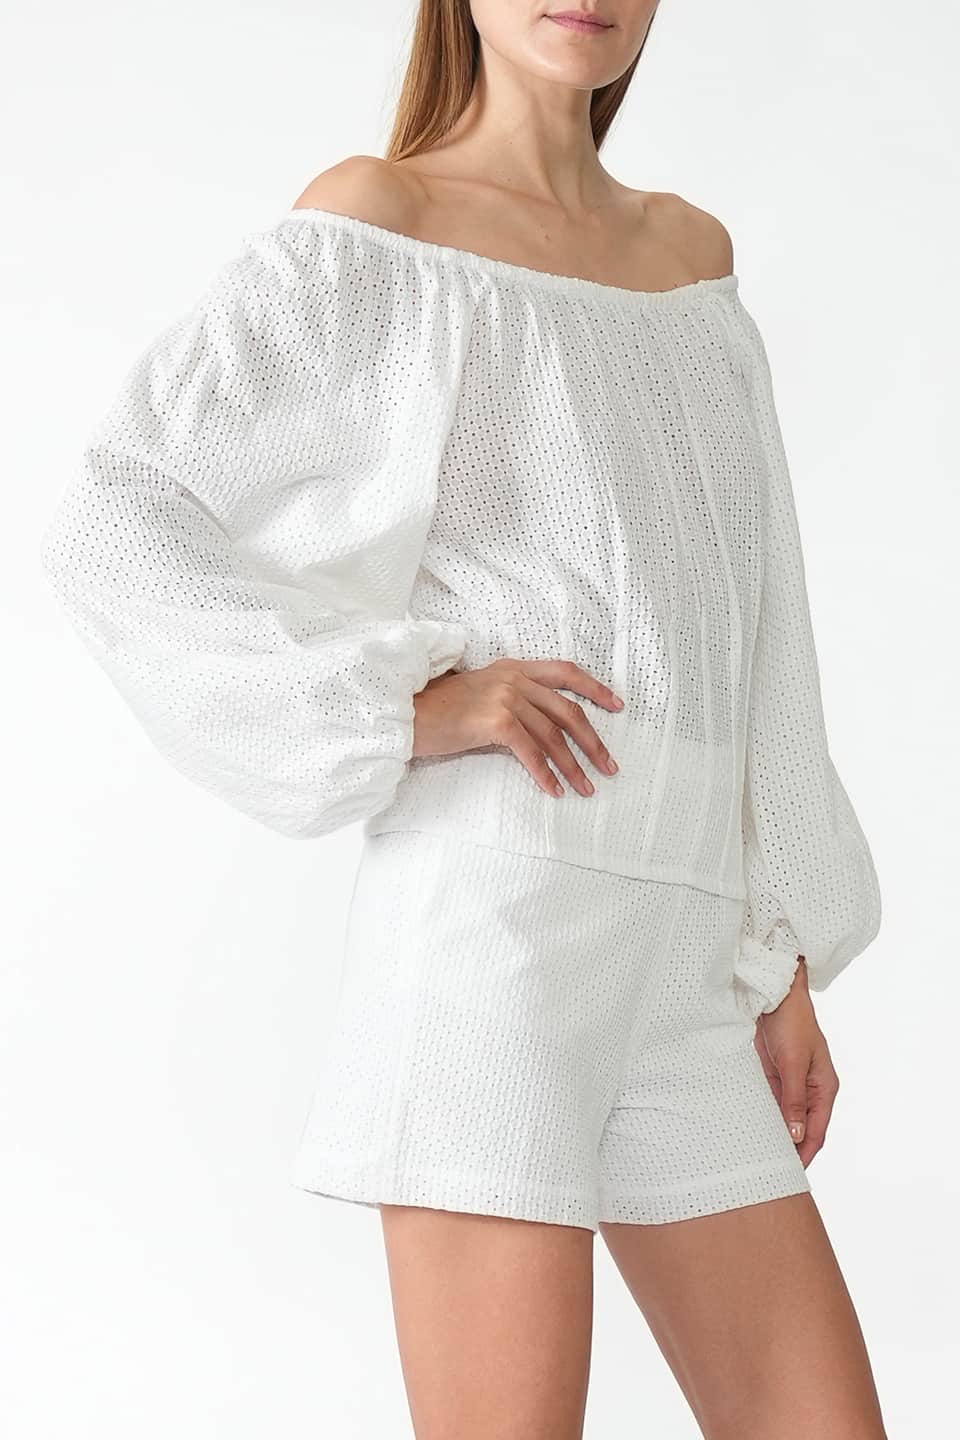 Designer White Women blouses, shop online with free delivery in UAE. Product gallery 3